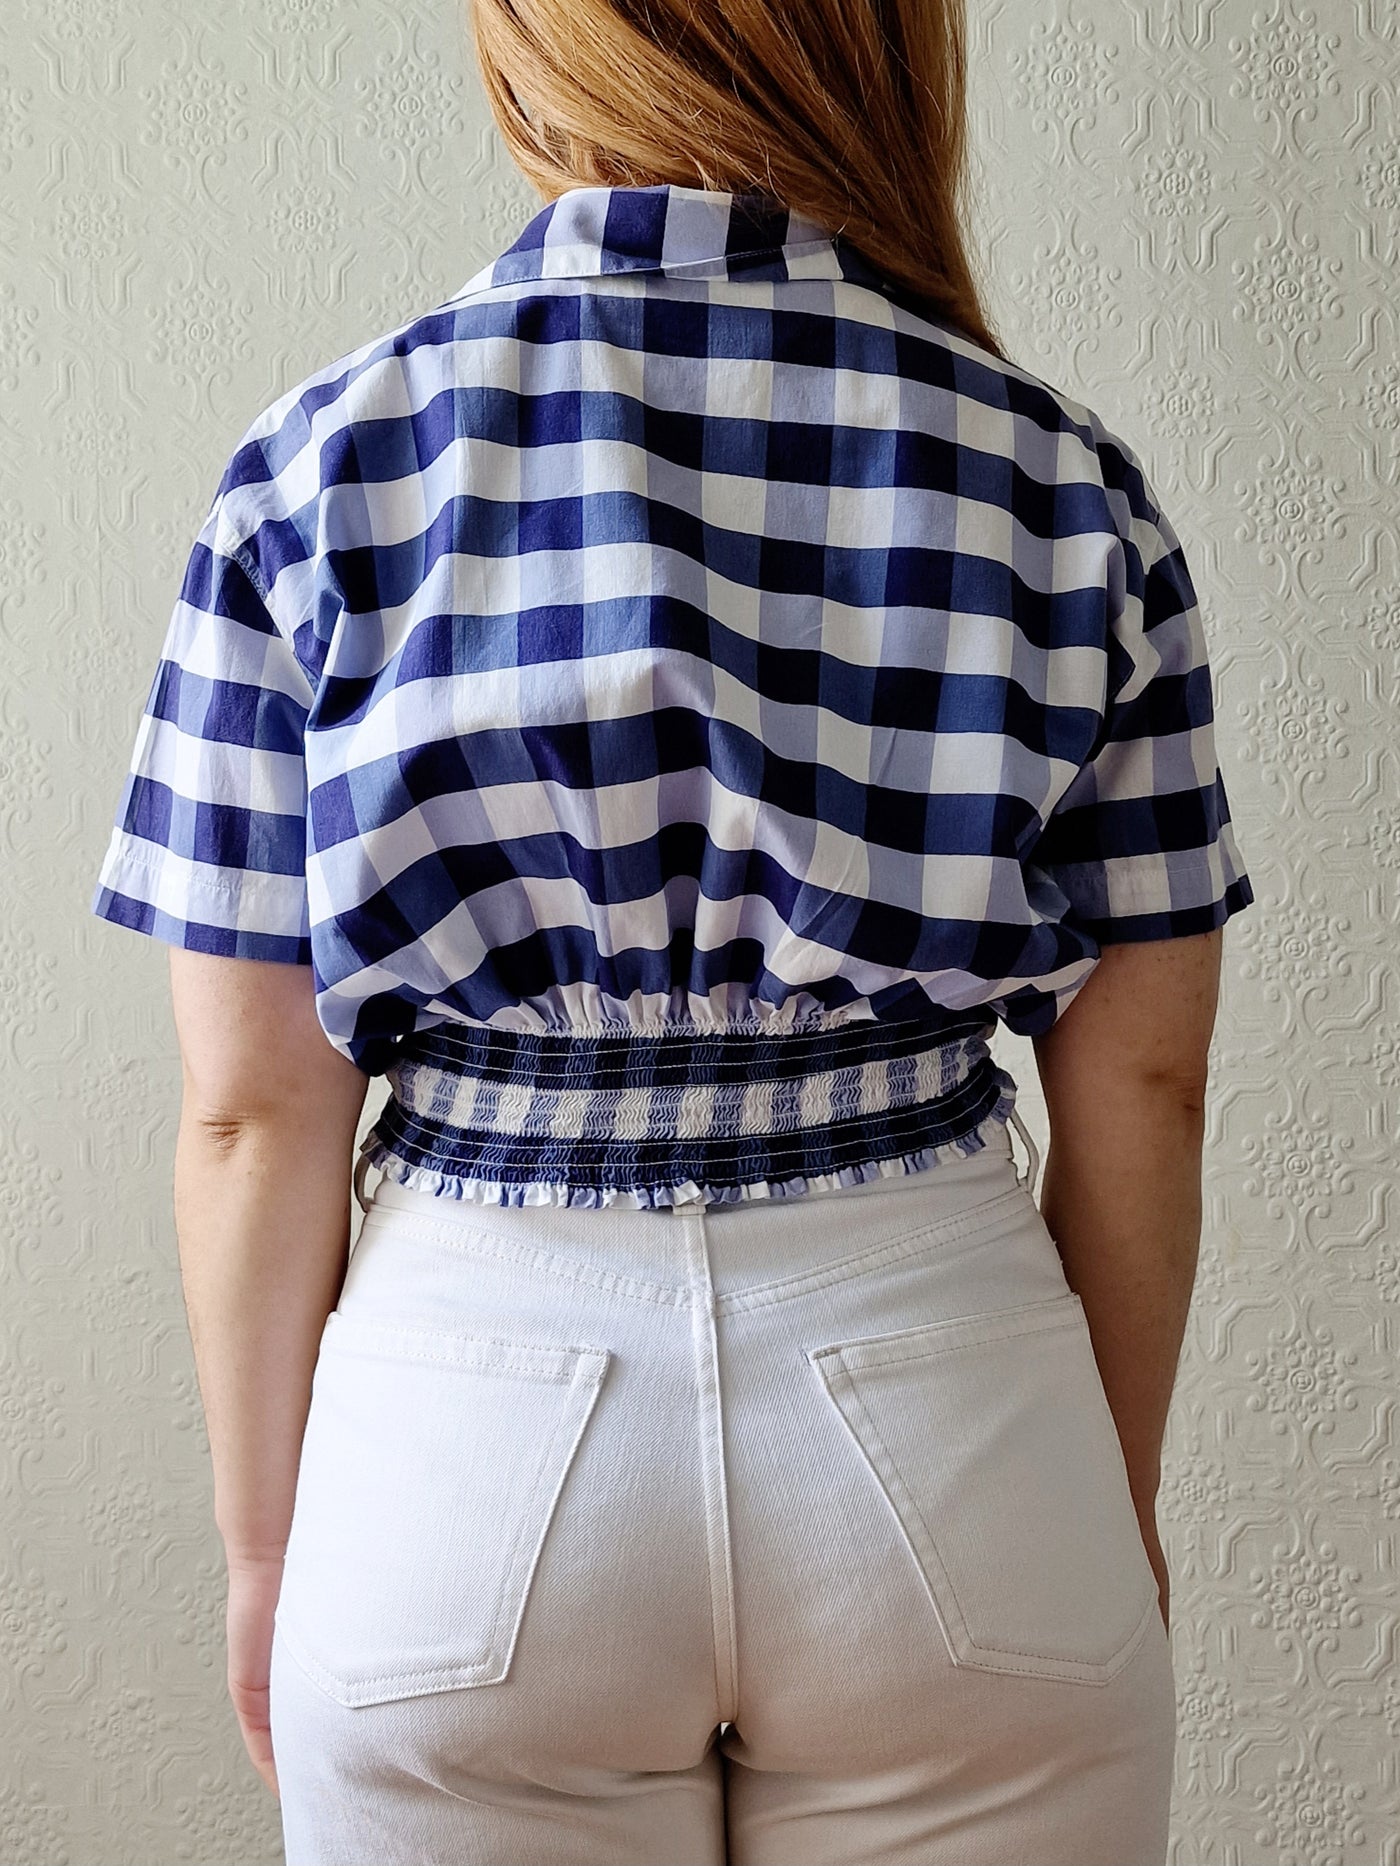 Vintage 90s White & Blue Gingham Cropped Blouse Top - M/L